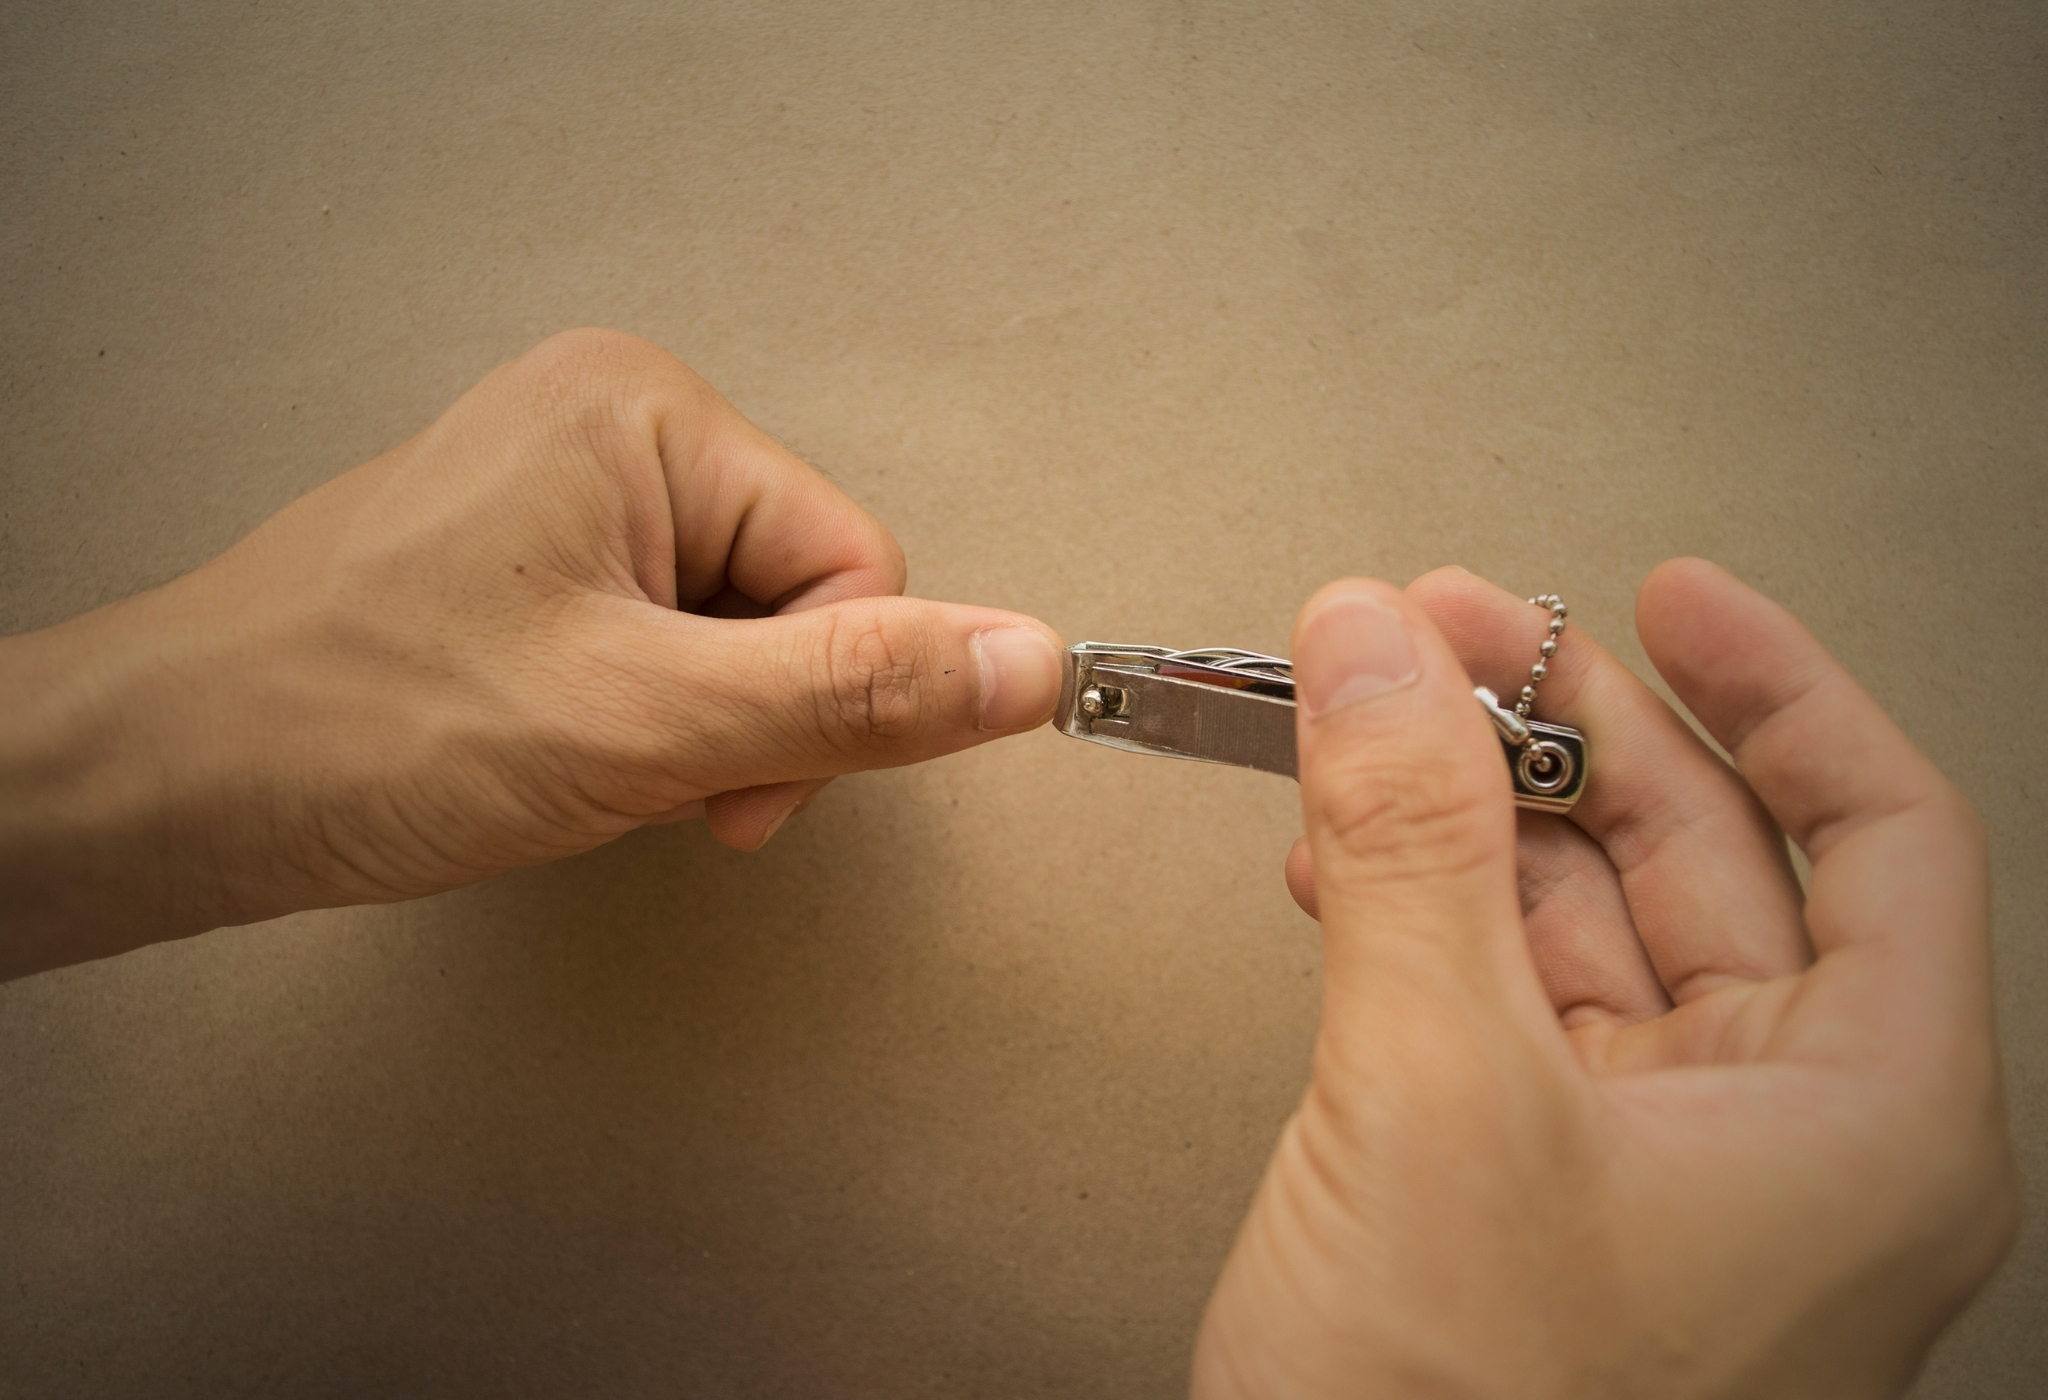 How to Cut Fingernails Properly - A Man's Guide to Getting It Right